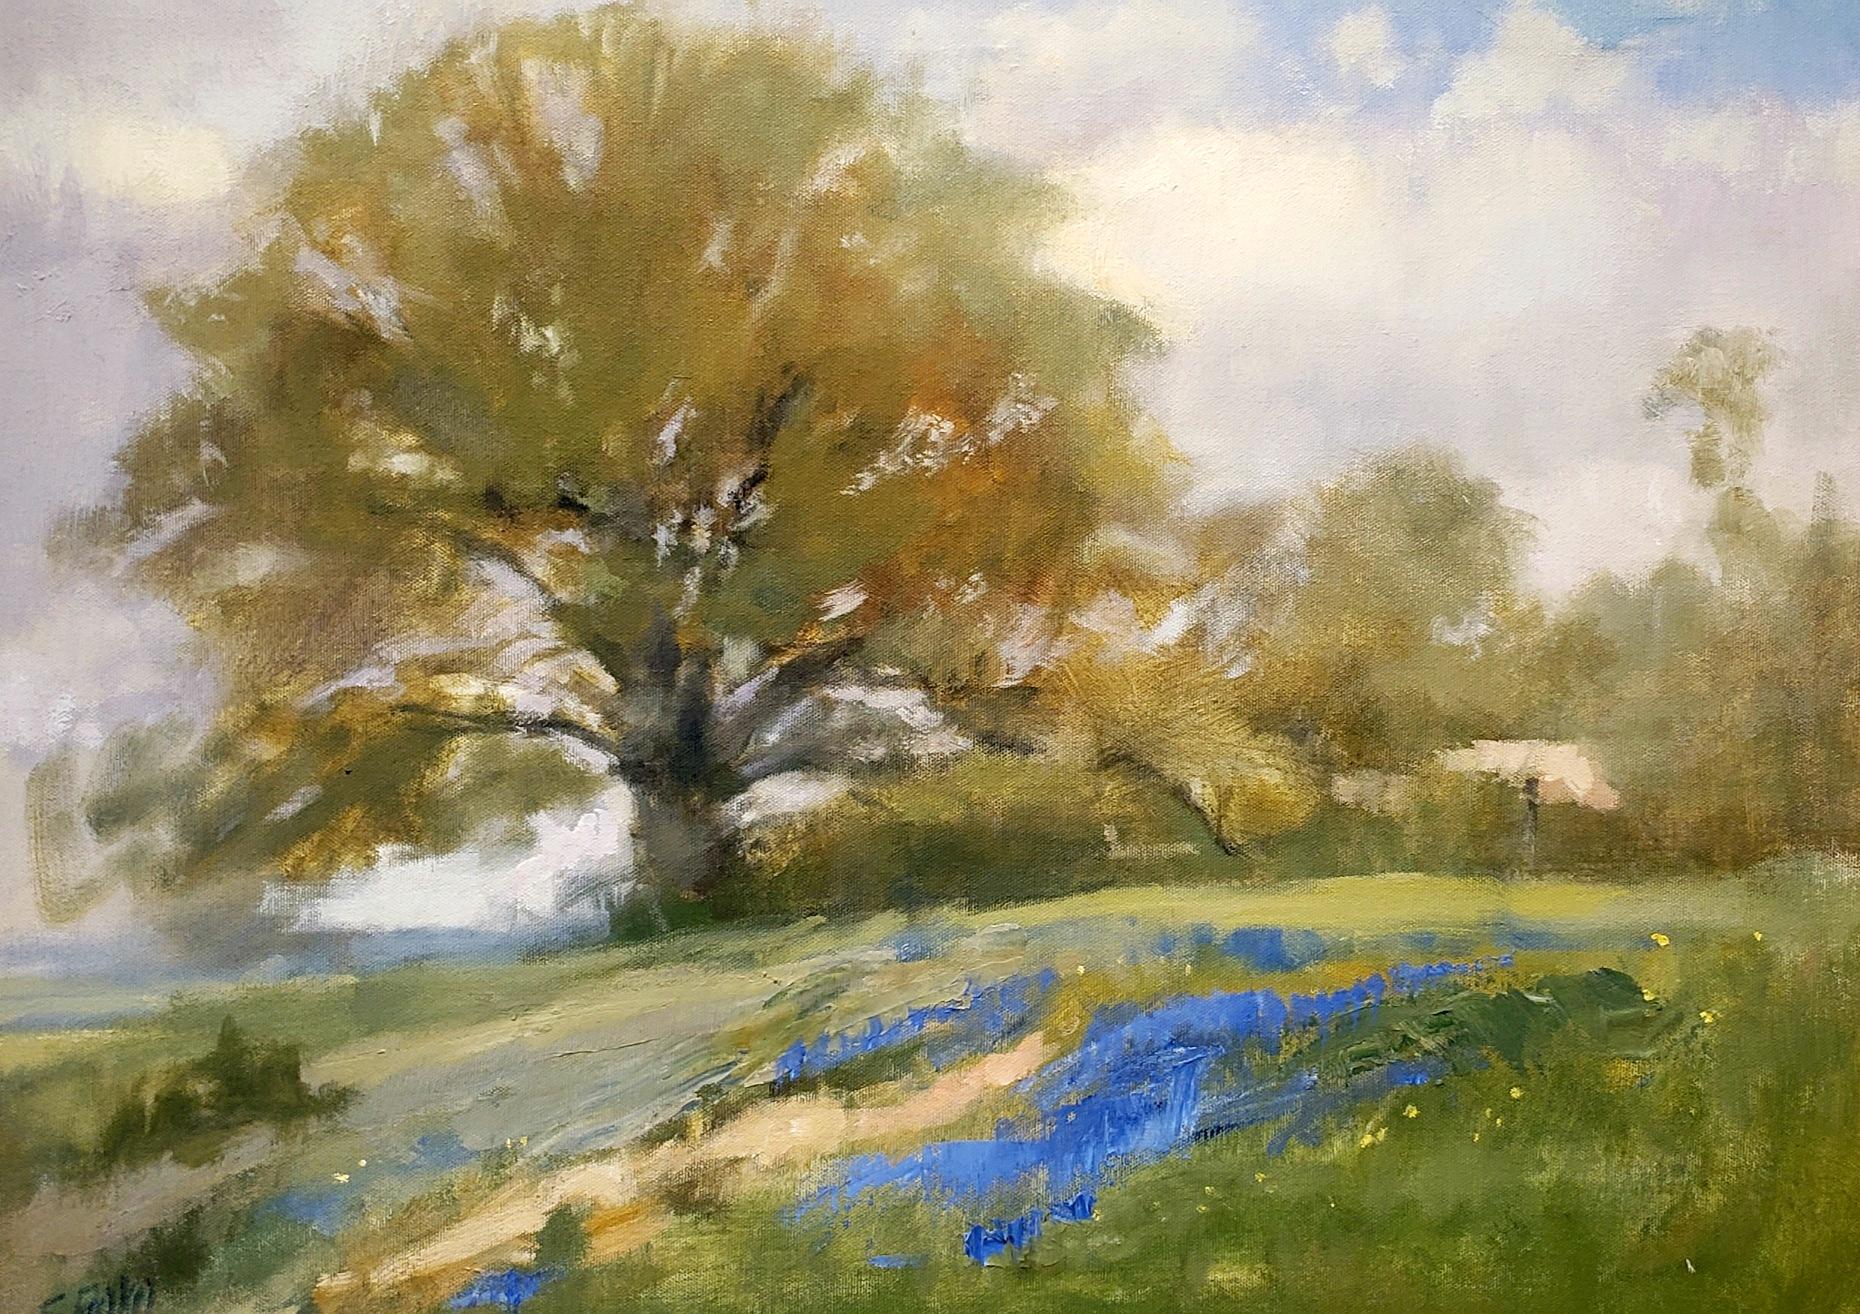 Hill Country .Texas landscape ,oil painting, Contemporary Impressionistic style